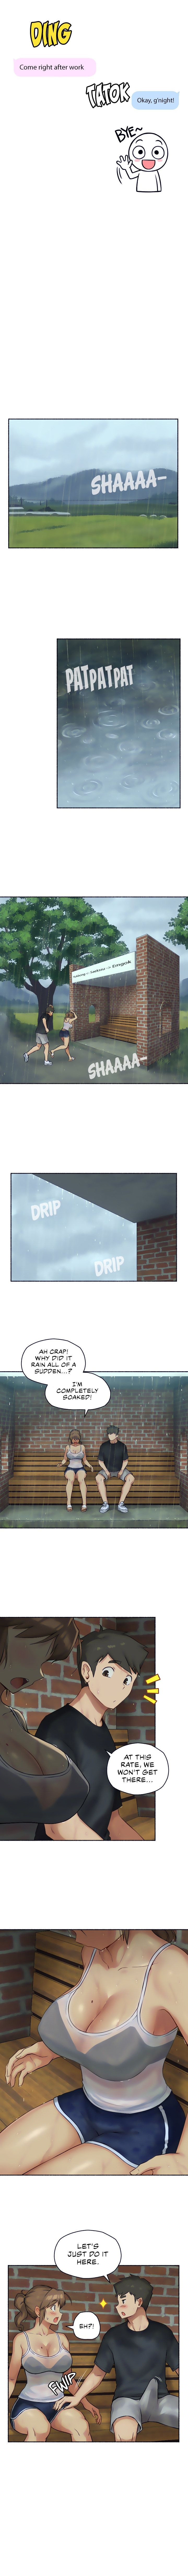 The Memories of that Summer Day - Chapter 4 Page 5